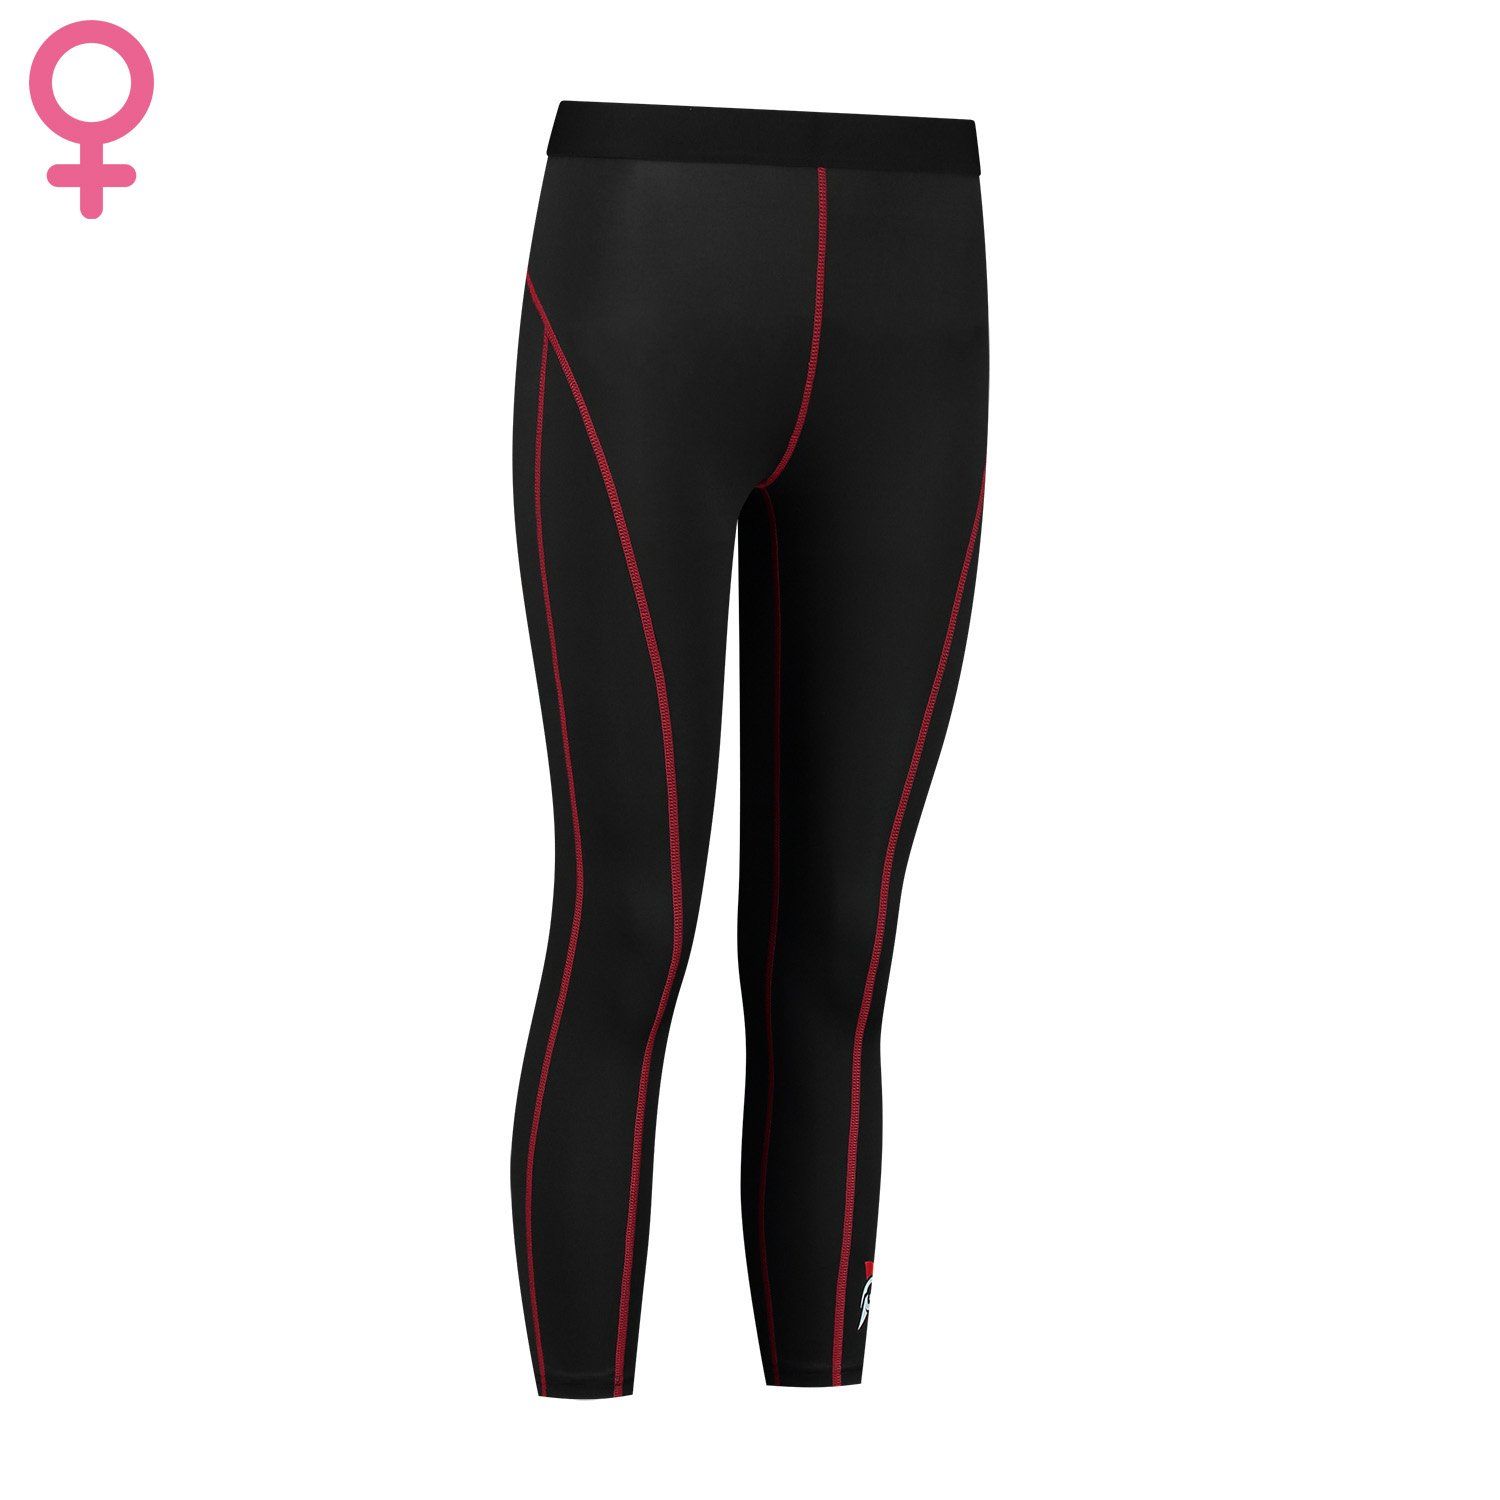 gladiator sports thermal tights long women